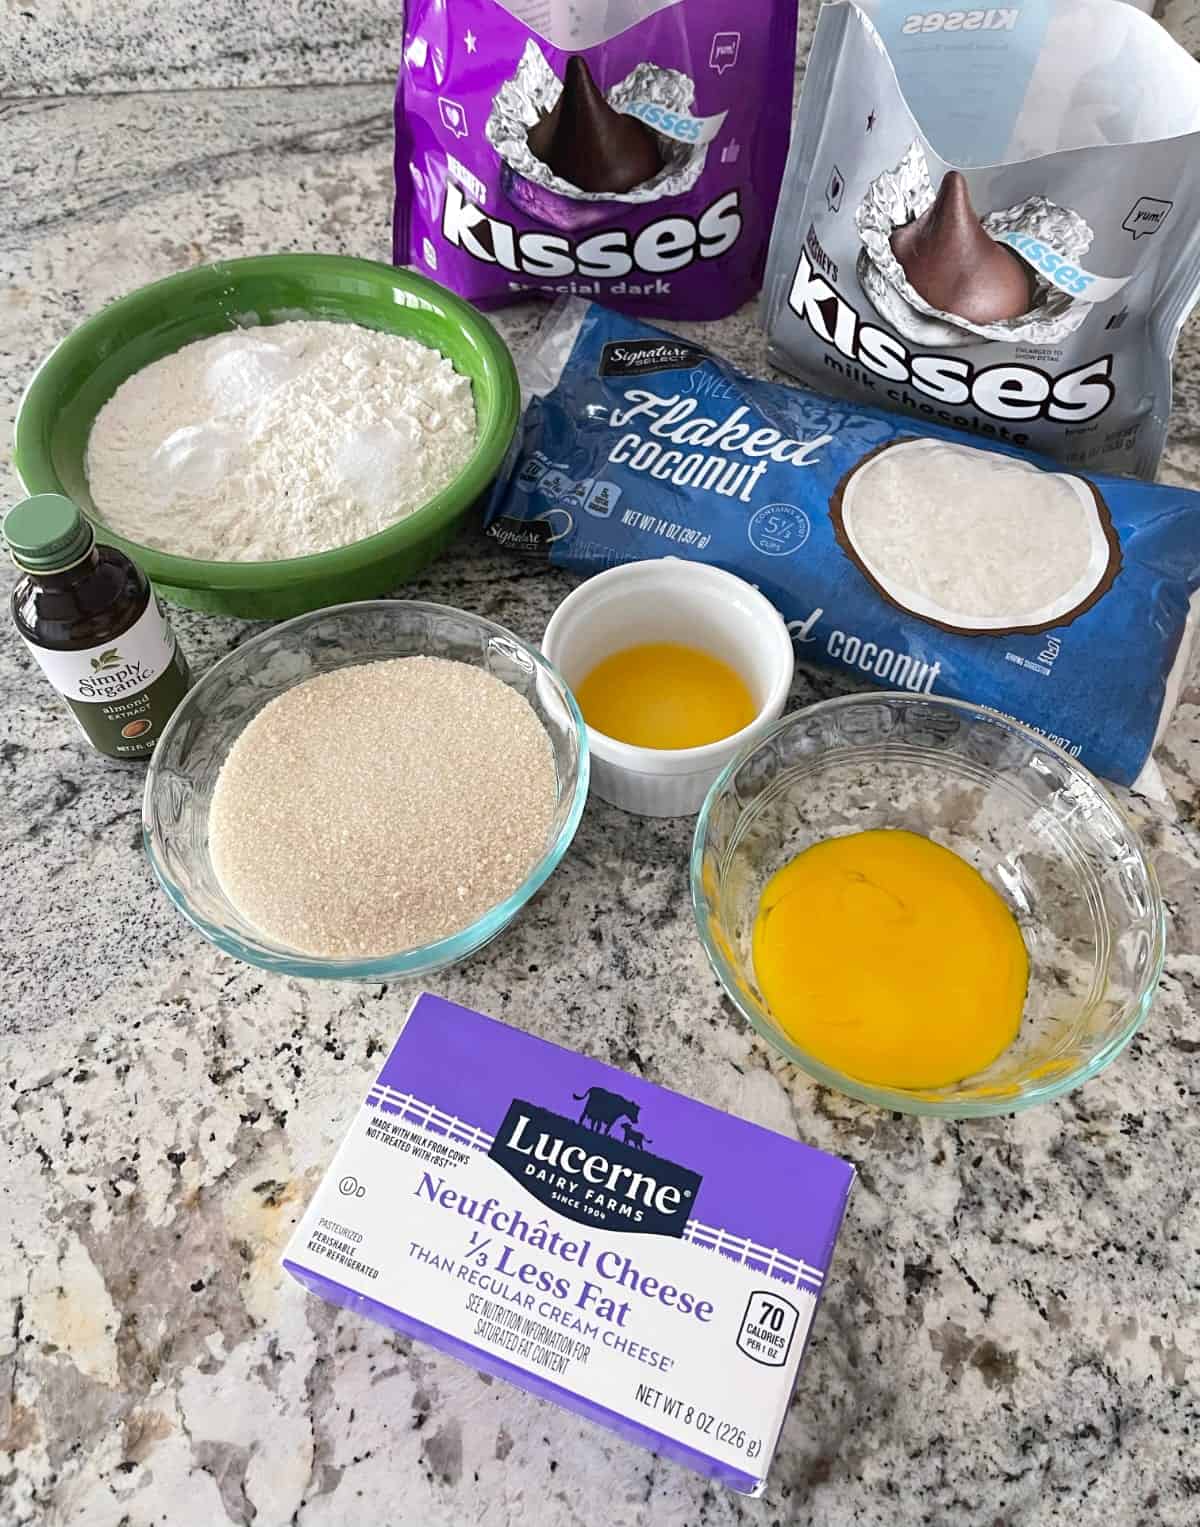 Ingredients including Hershey's kisses, flaked coconut, flour, Truvia, egg yolk, orange juice, cream cheese and almond extract.